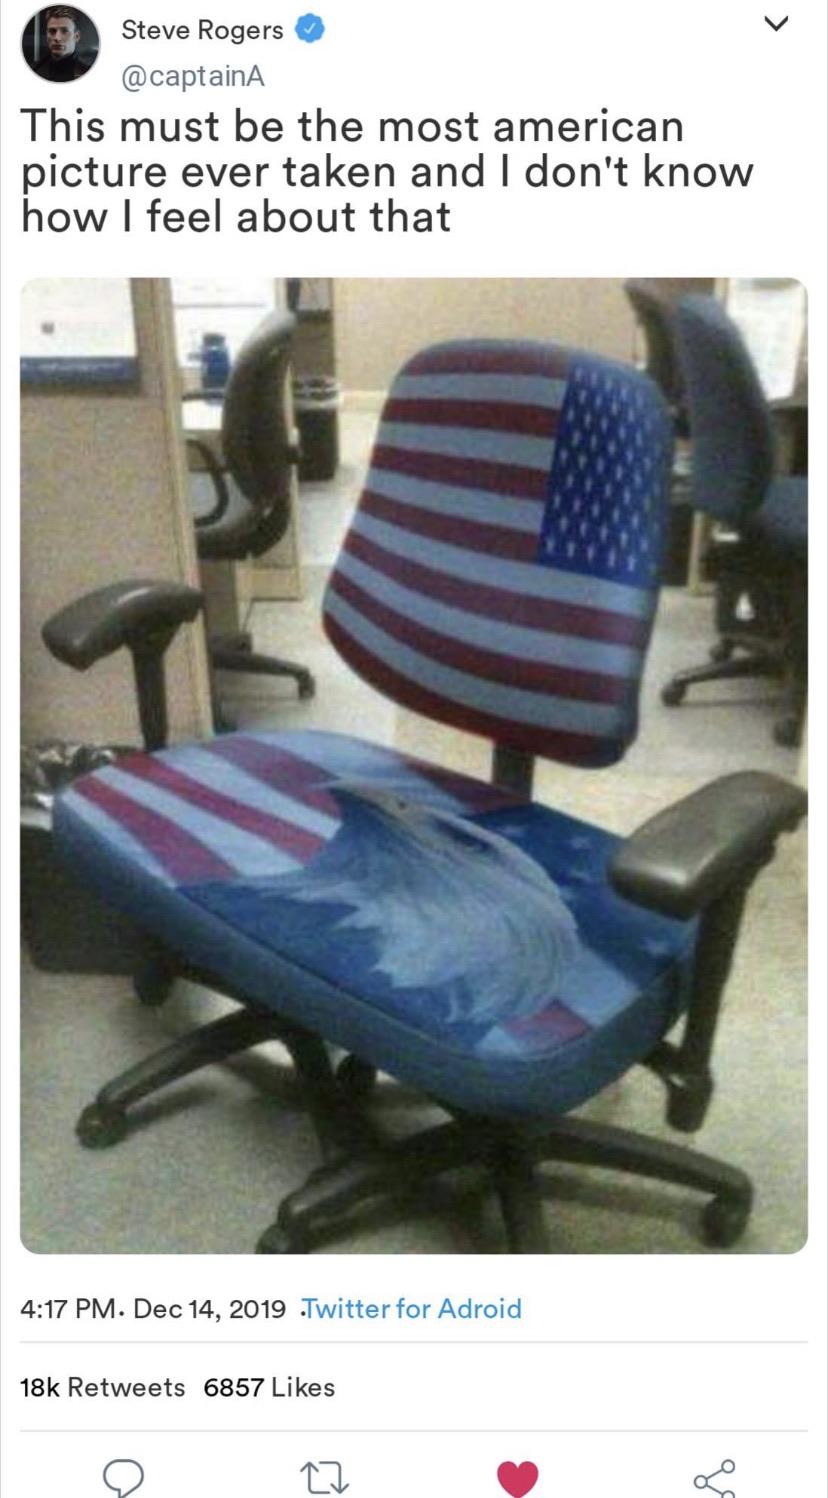 murica chair - Steve Rogers This must be the most american picture ever taken and I don't know how I feel about that . Twitter for Adroid 18k 6857